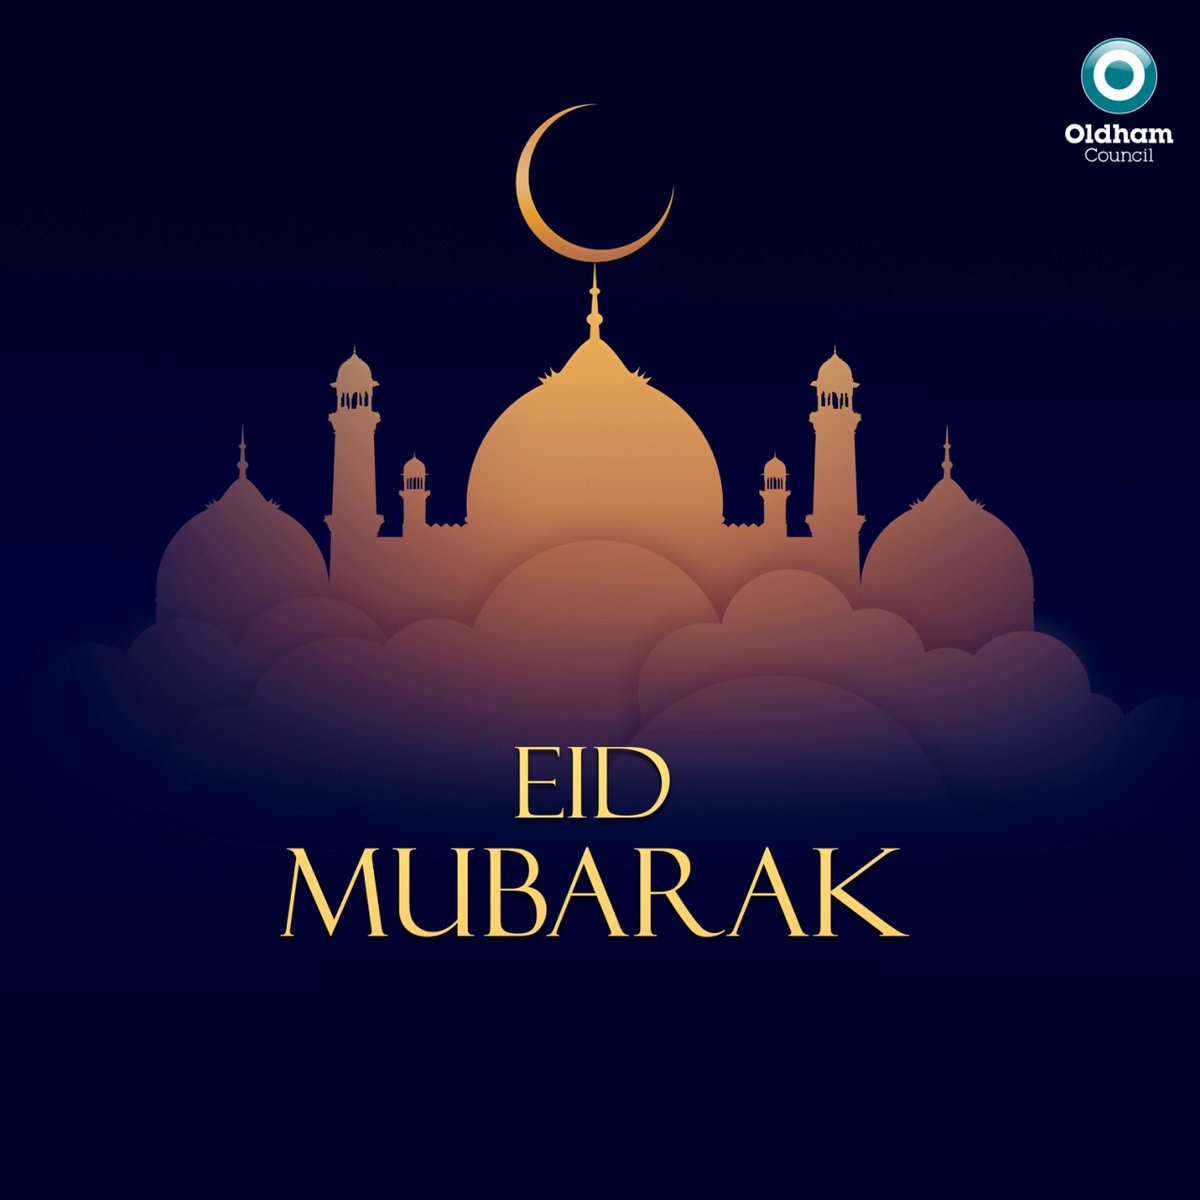 🕌 Eid Mubarak! As we mark the end of Ramadan, we hope this Eid brings you joy, and peace with your family and friends. ❤️ It’s a beautiful moment to reflect on the past month, share kindness, and look forward to happy times ahead! Wishing you a wonderful celebration. ✨ #Eid